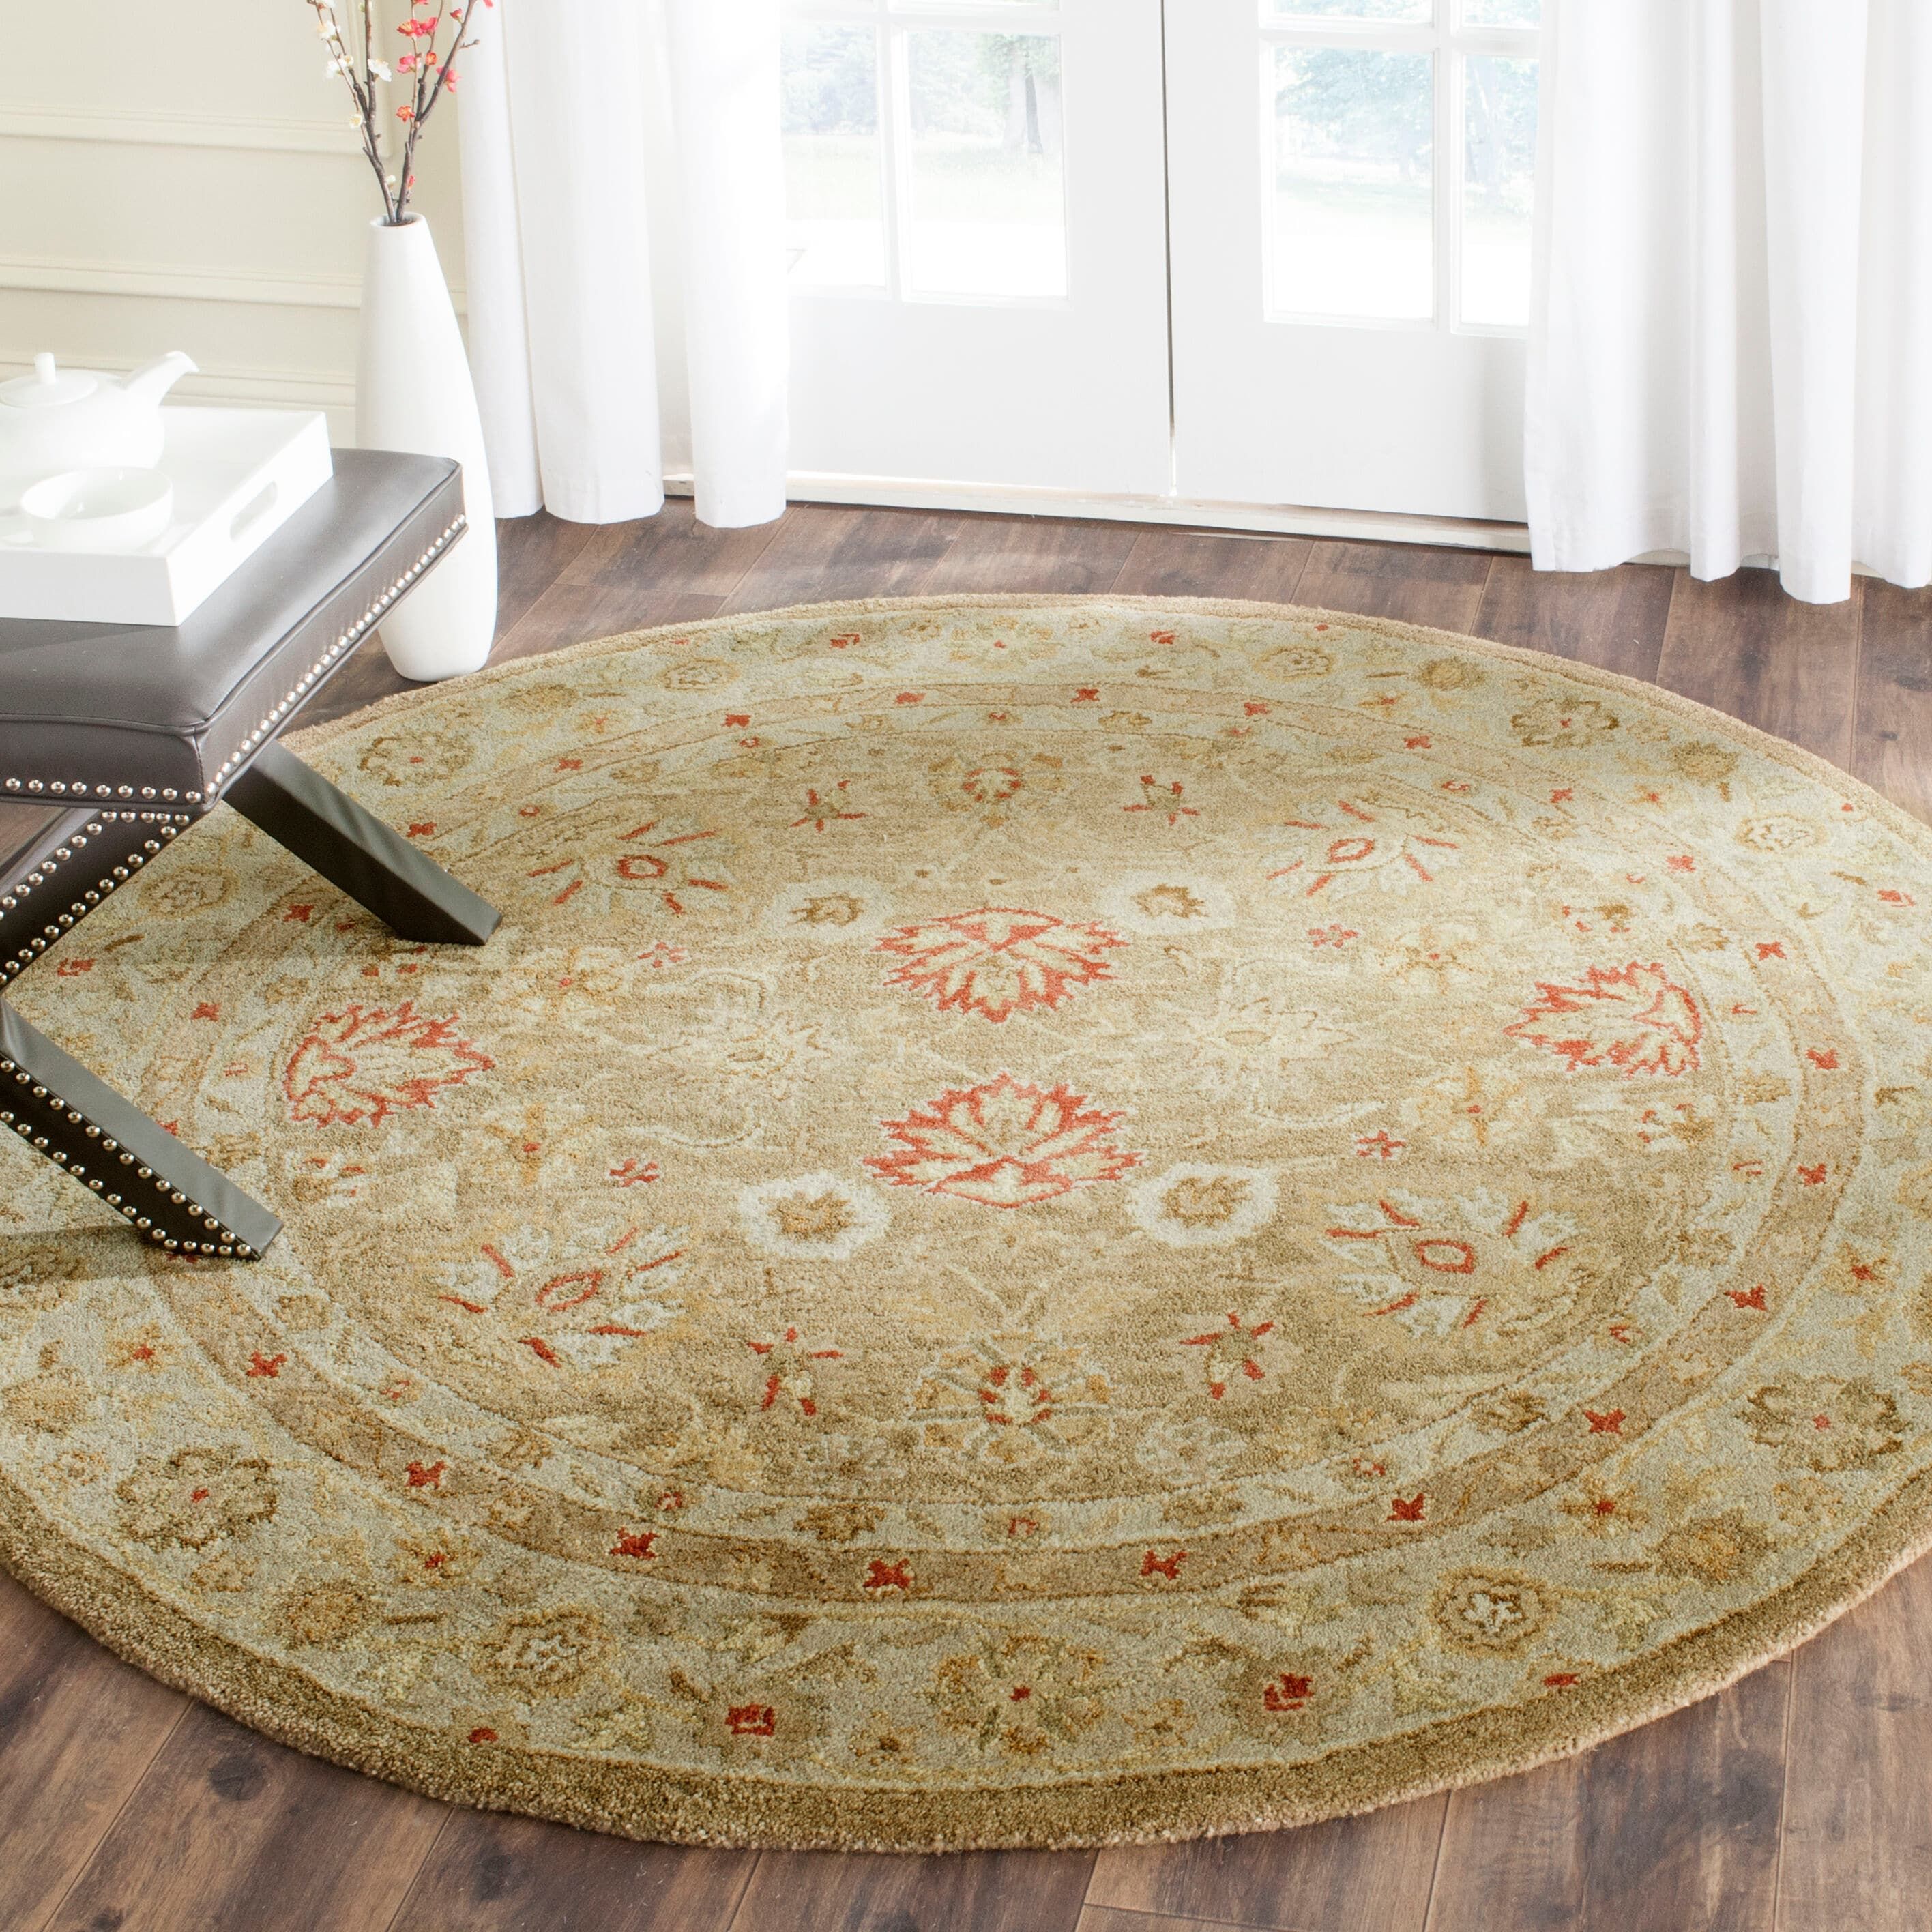 Safavieh 8 X 10 Wool Brown/beige Oval Indoor Floral/botanical Vintage Area  Rug In The Rugs Department At Lowes With Regard To Botanical Oval Rugs (View 2 of 15)